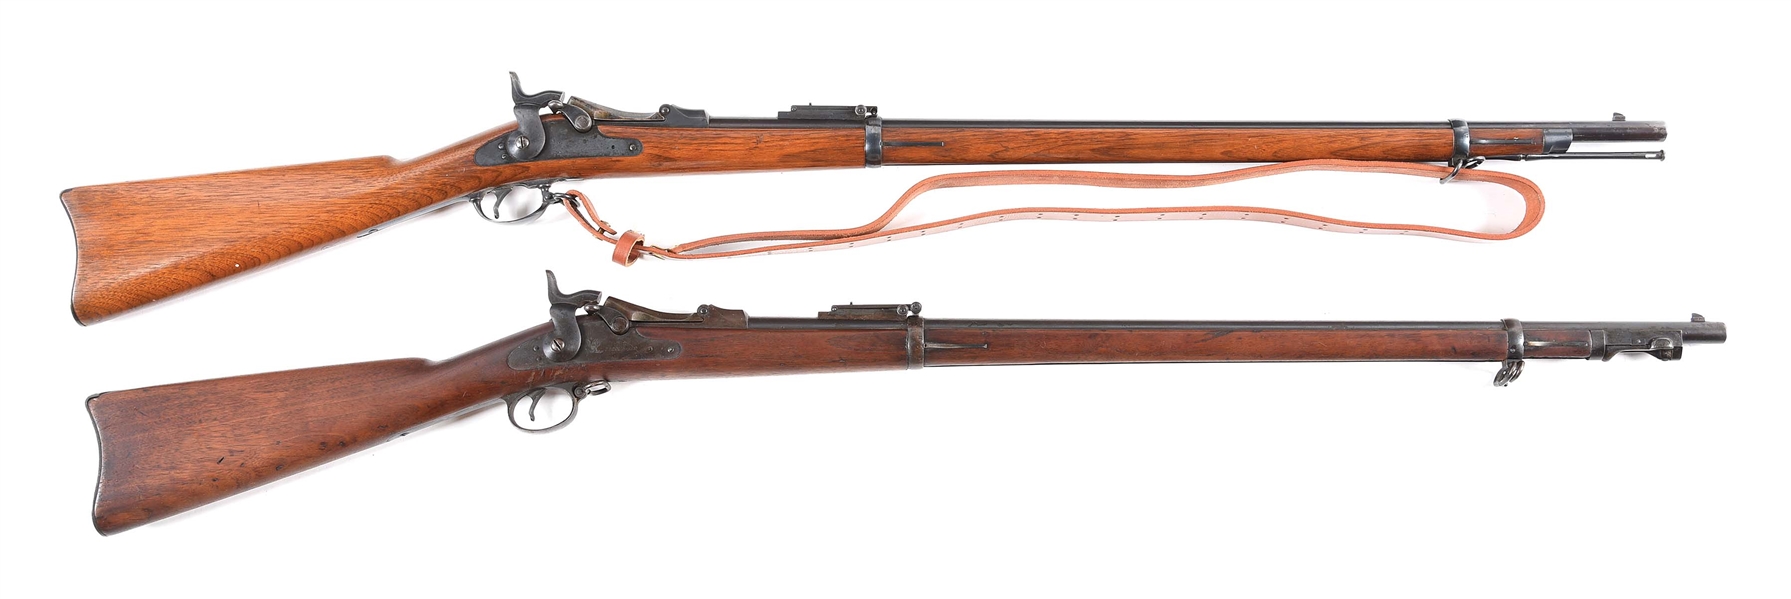 (A) SHOOTERS LOT OF 2 SPRINGFIELD TRAPDOOR RIFLES.